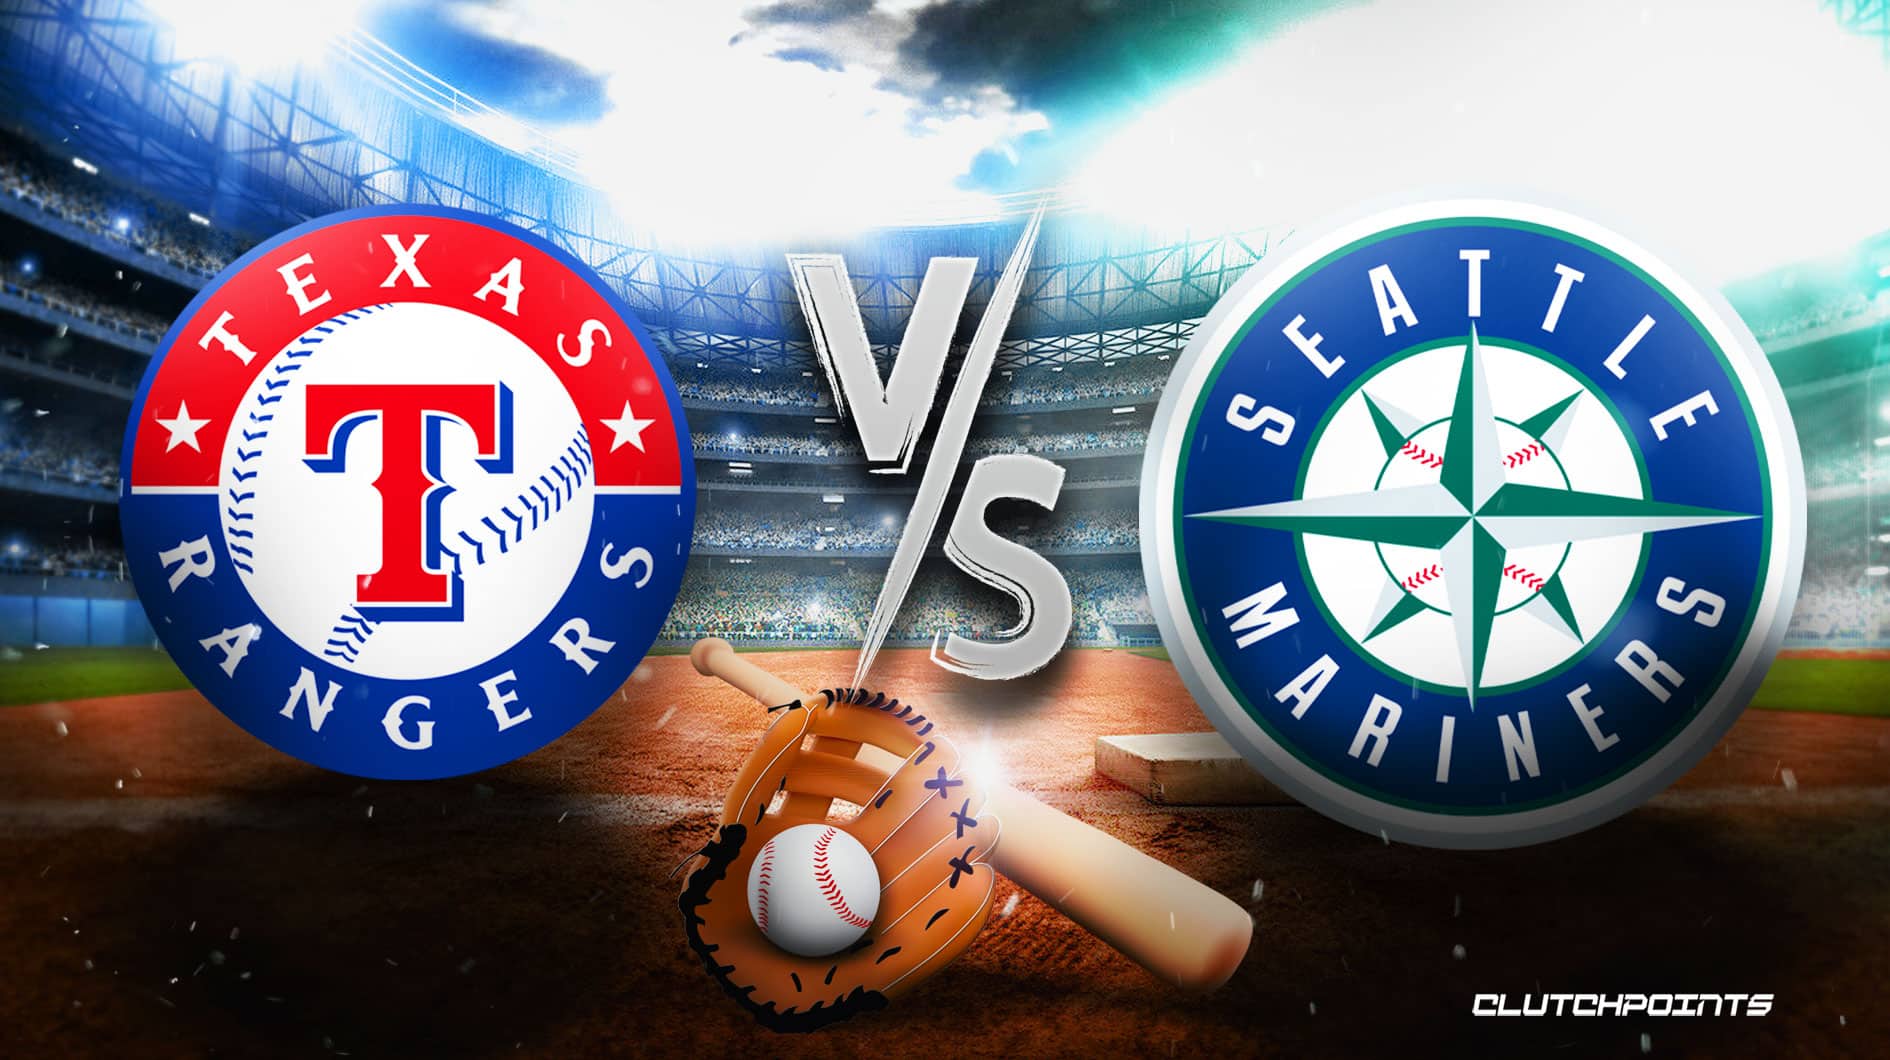 Rangers, Nationals edge closer to berth in Majors title game